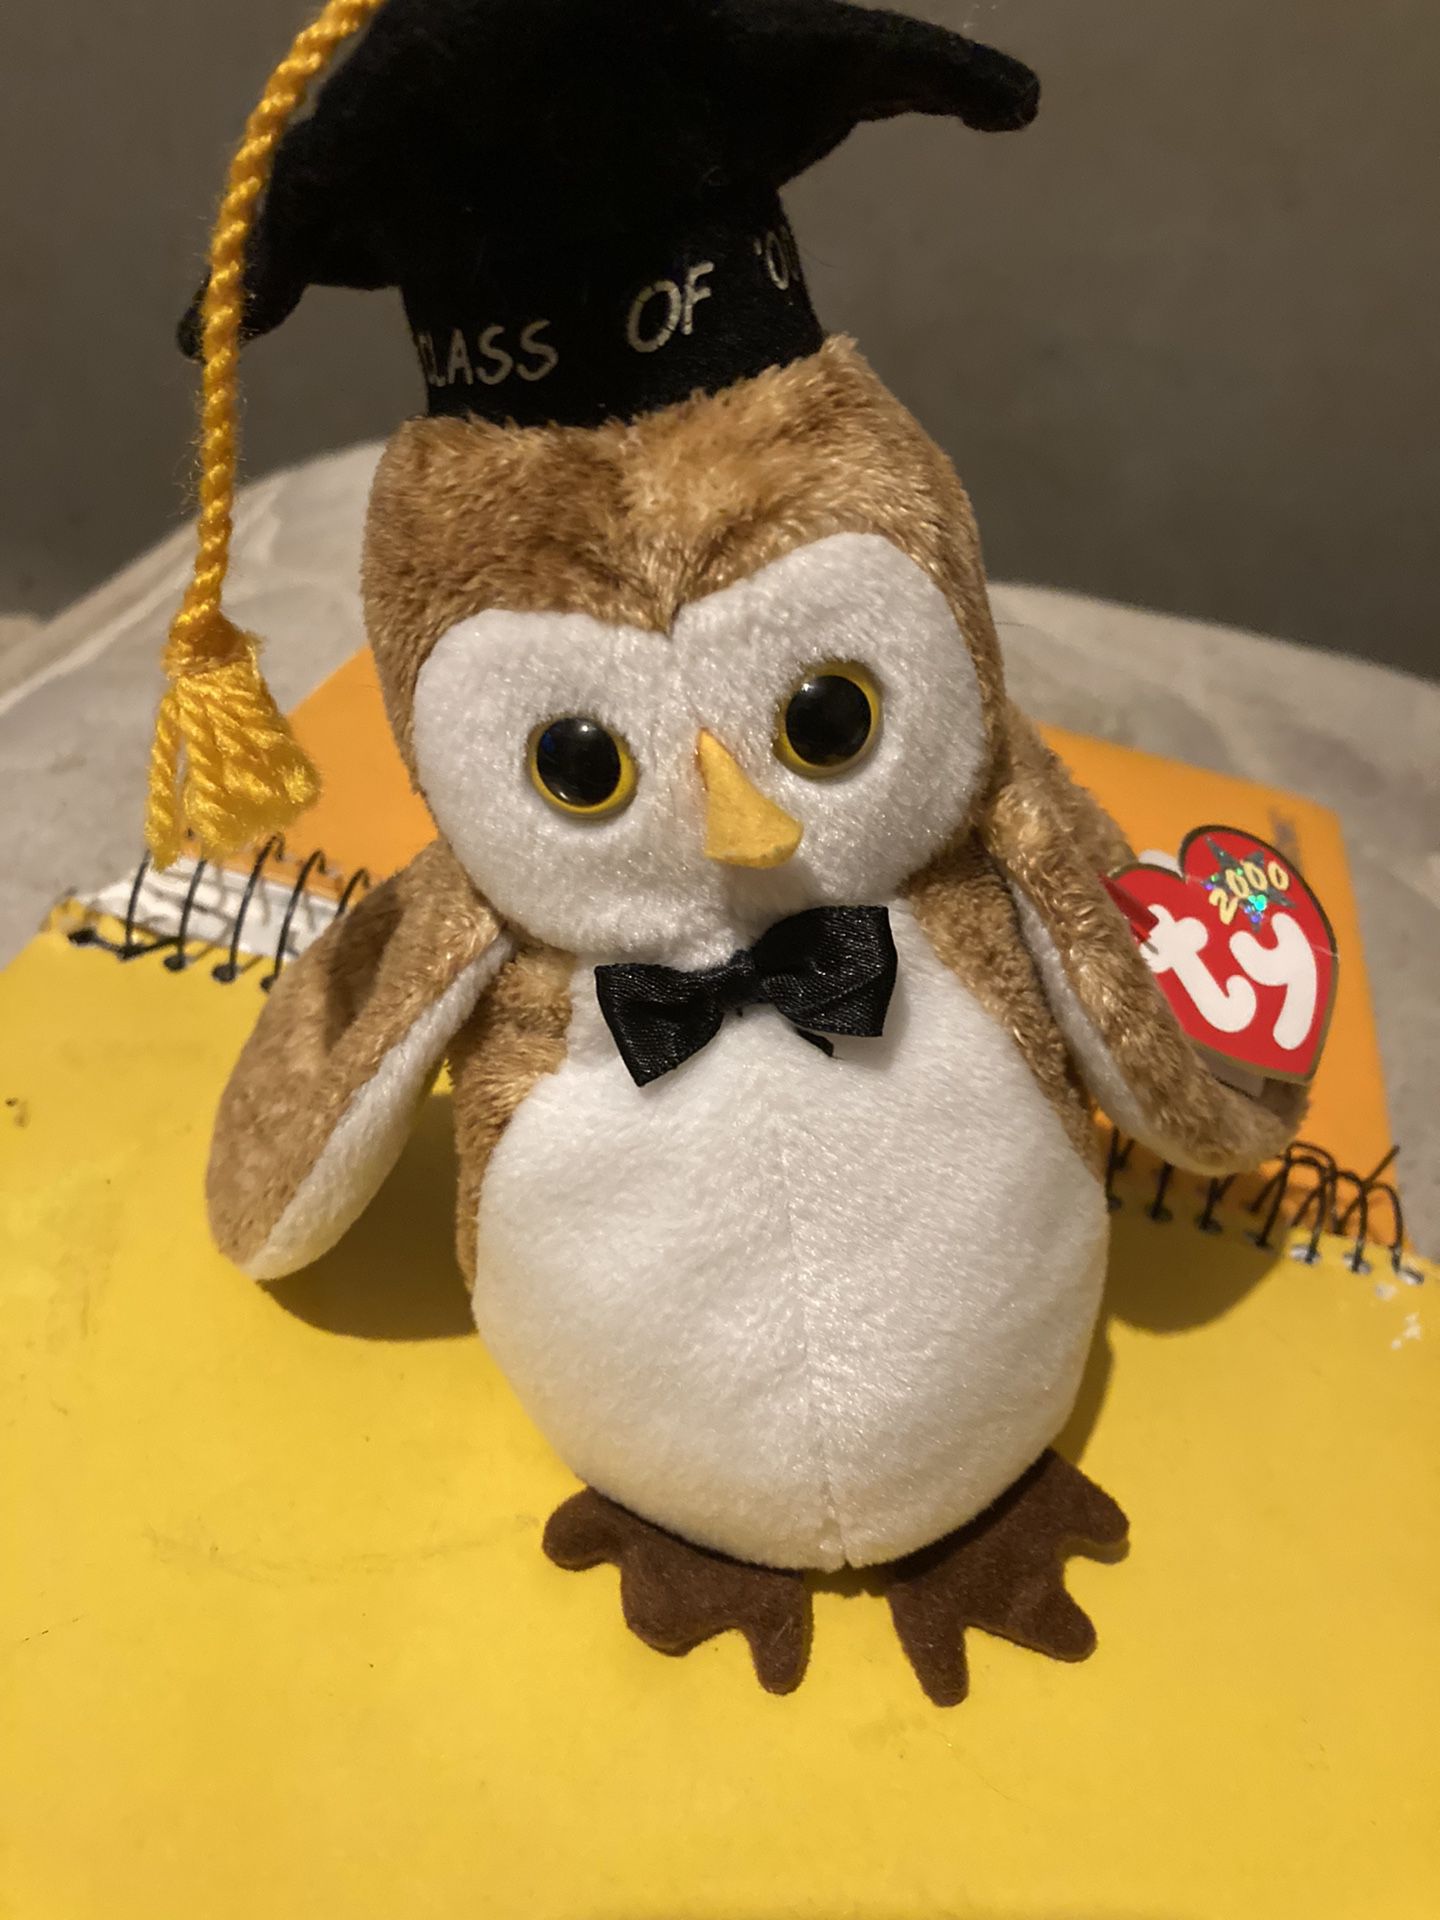 Wisest The Owl Rare Beanie Baby